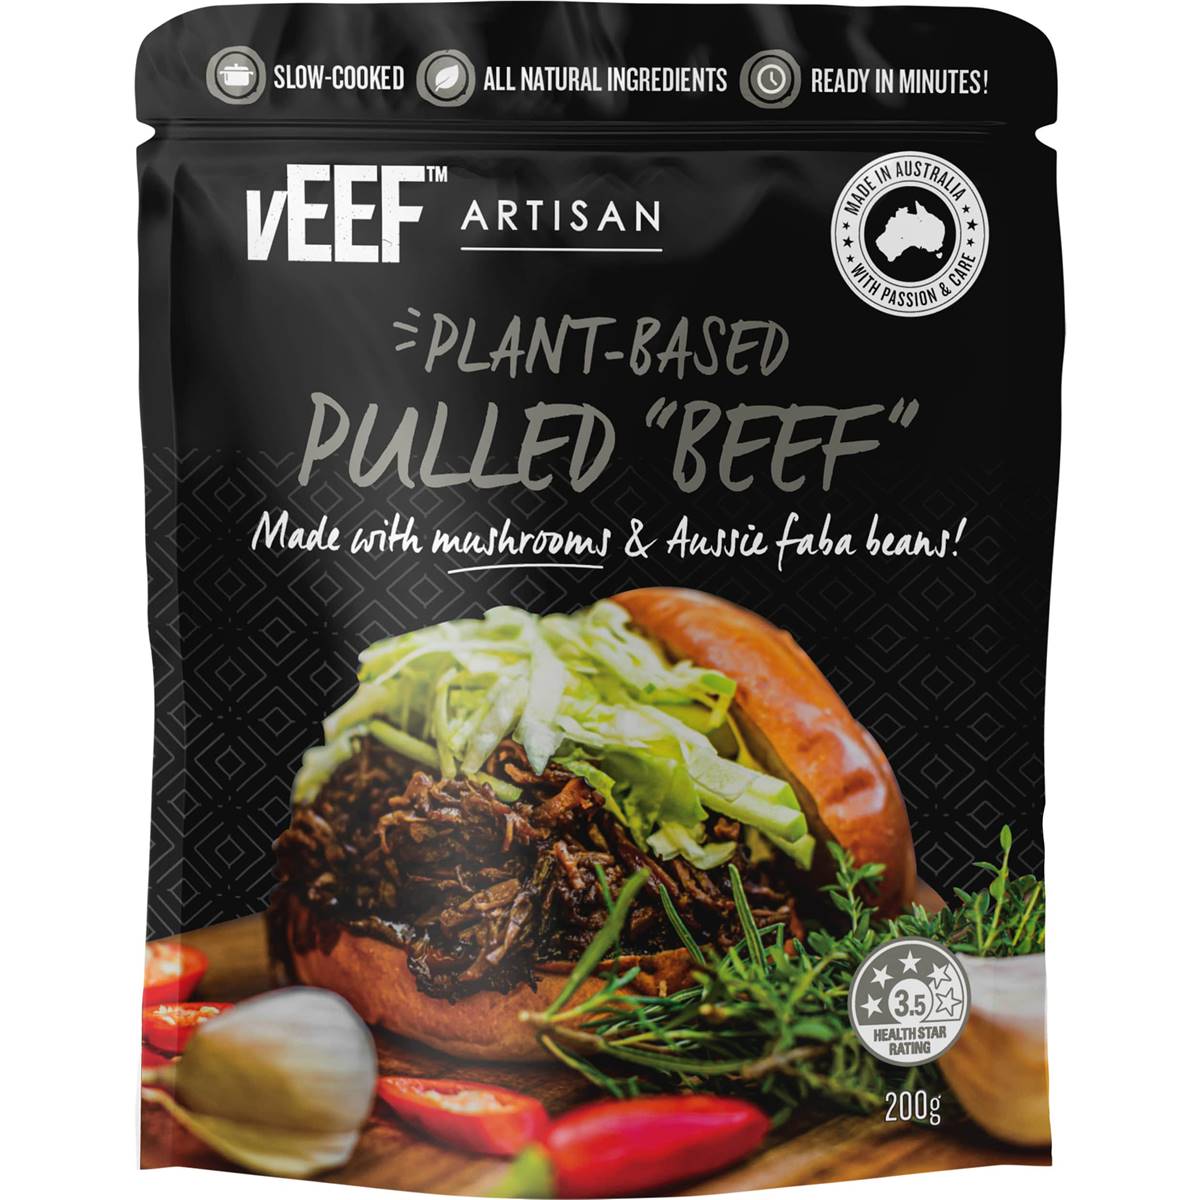 Calories in Veef Artisan Plant Based Pulled Beef Chilled Meal